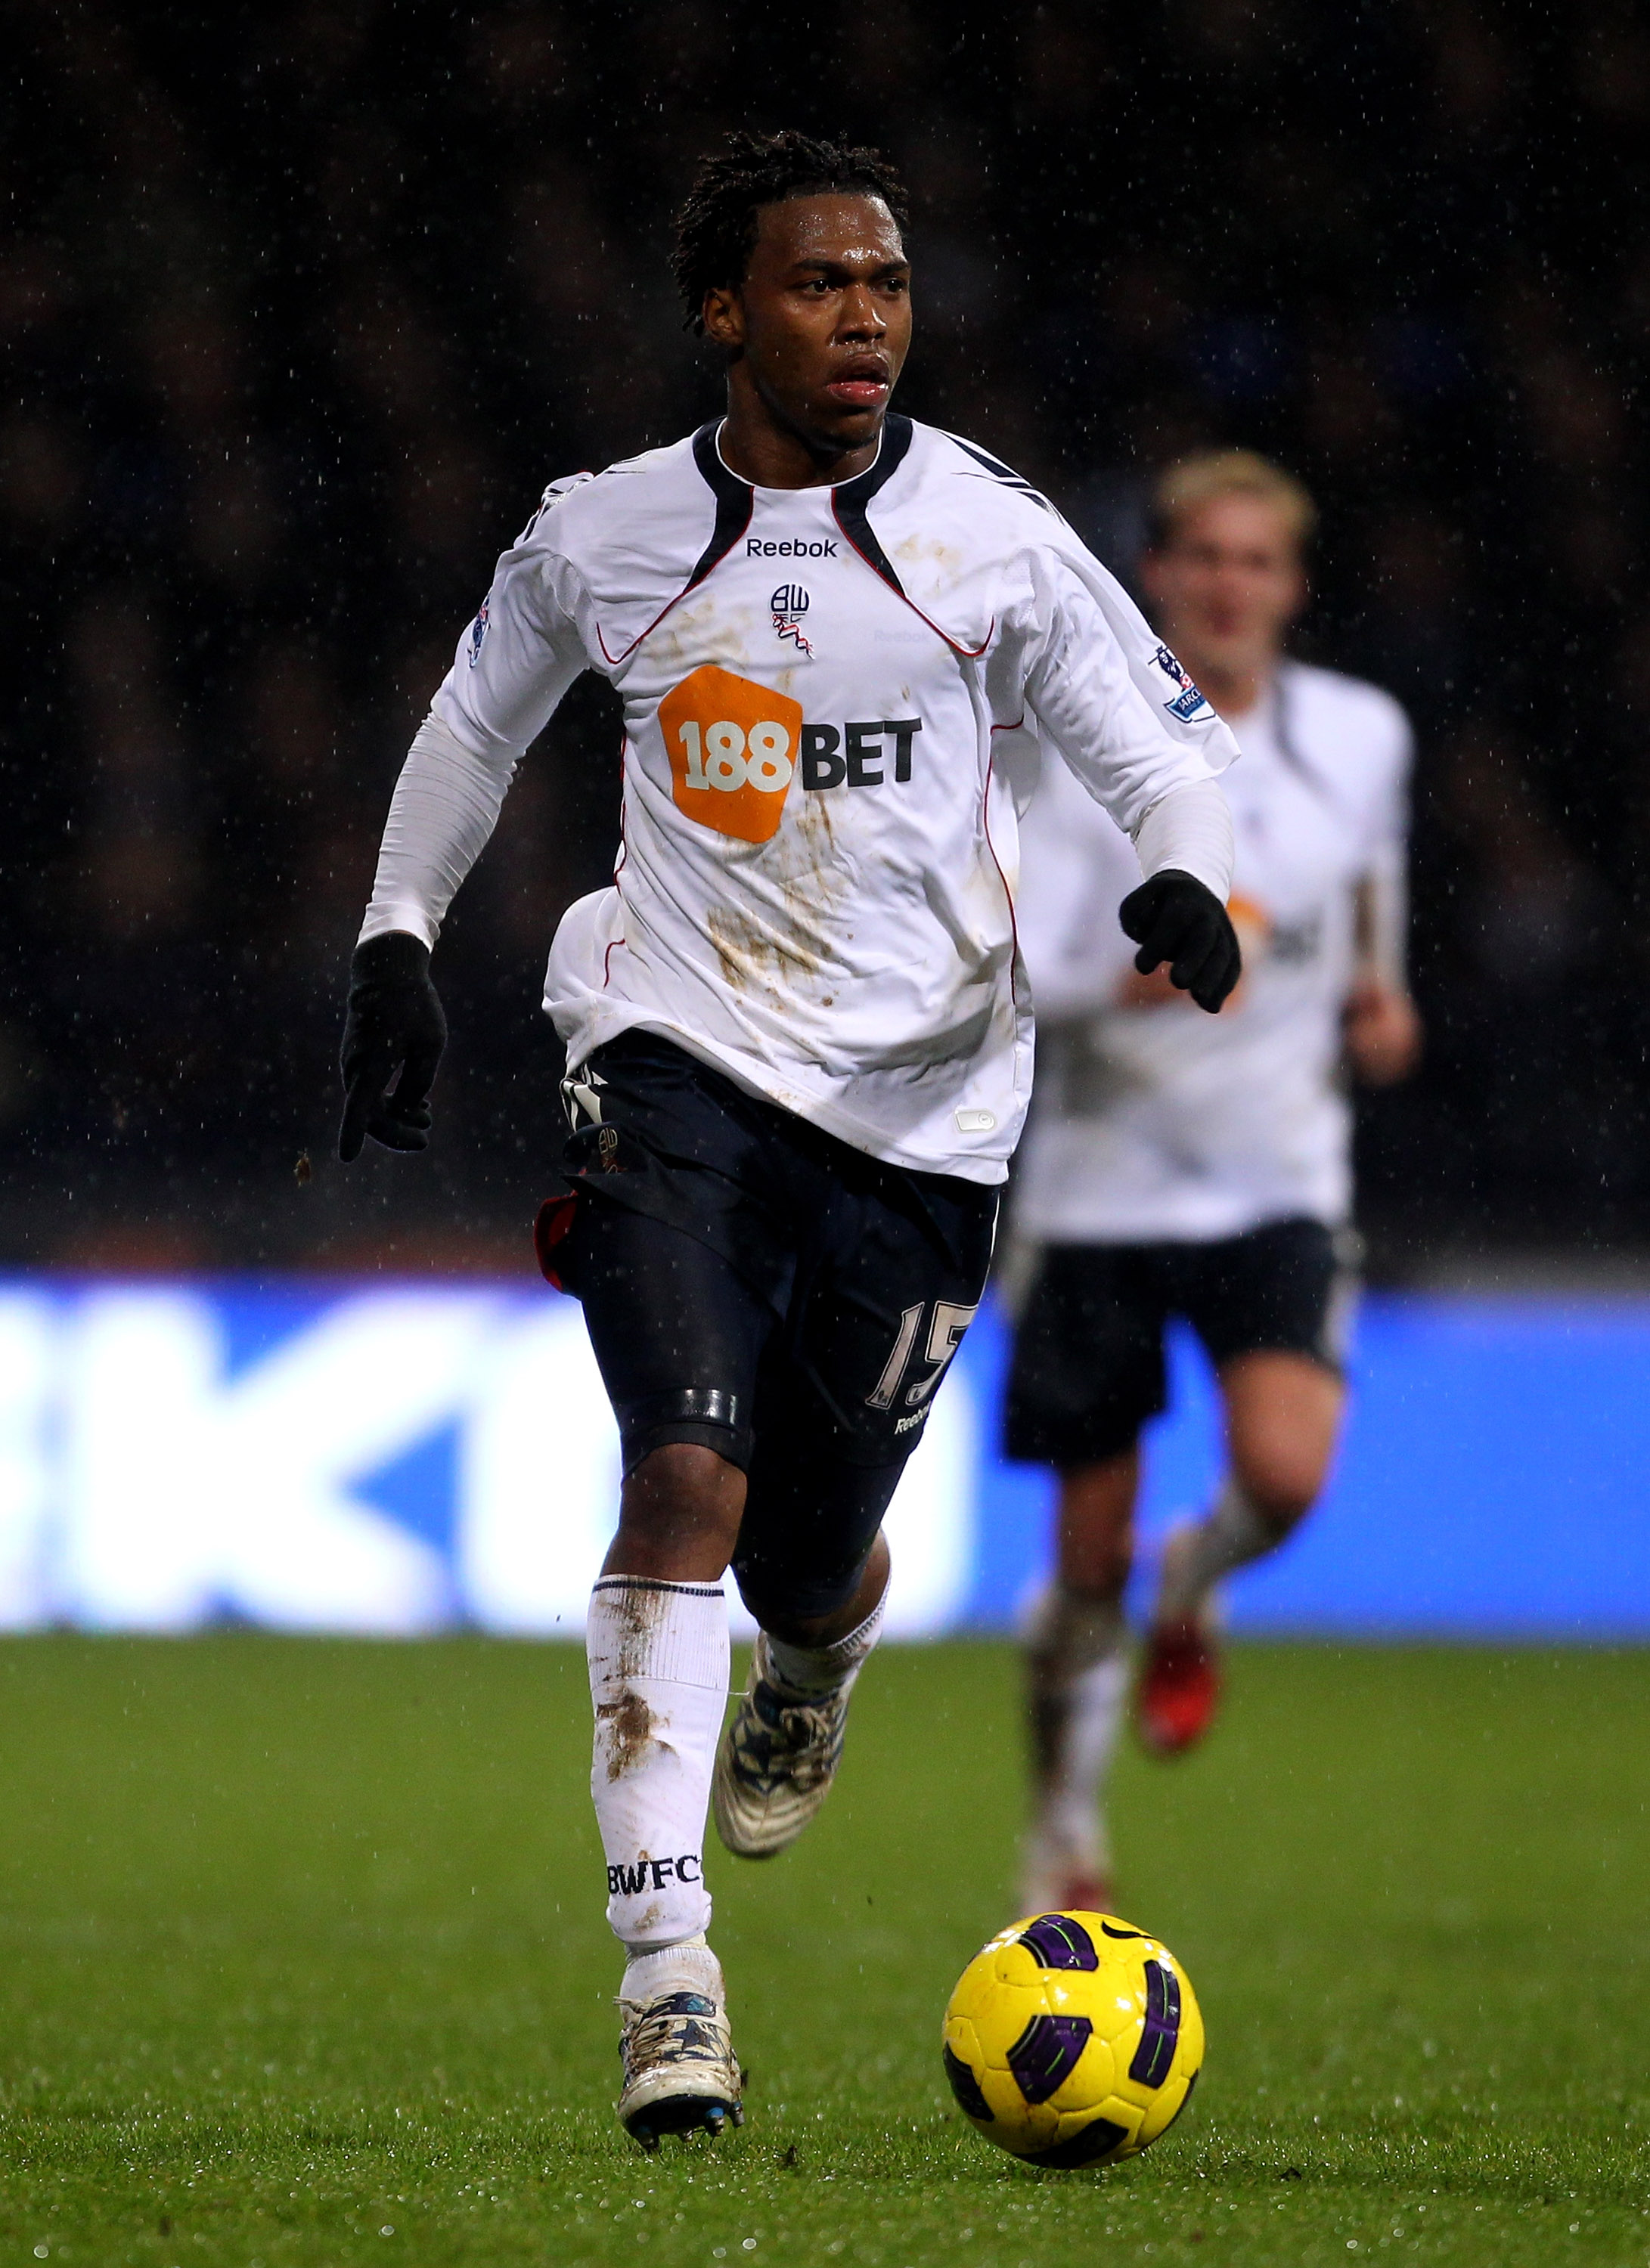 BOLTON, ENGLAND - FEBRUARY 13:  Daniel Sturridge of Bolton Wanderers in action during the Barclays Premier League match between Bolton Wanderers and Everton at the Reebok Stadium on February 13, 2011 in Bolton, England.  (Photo by Alex Livesey/Getty Image